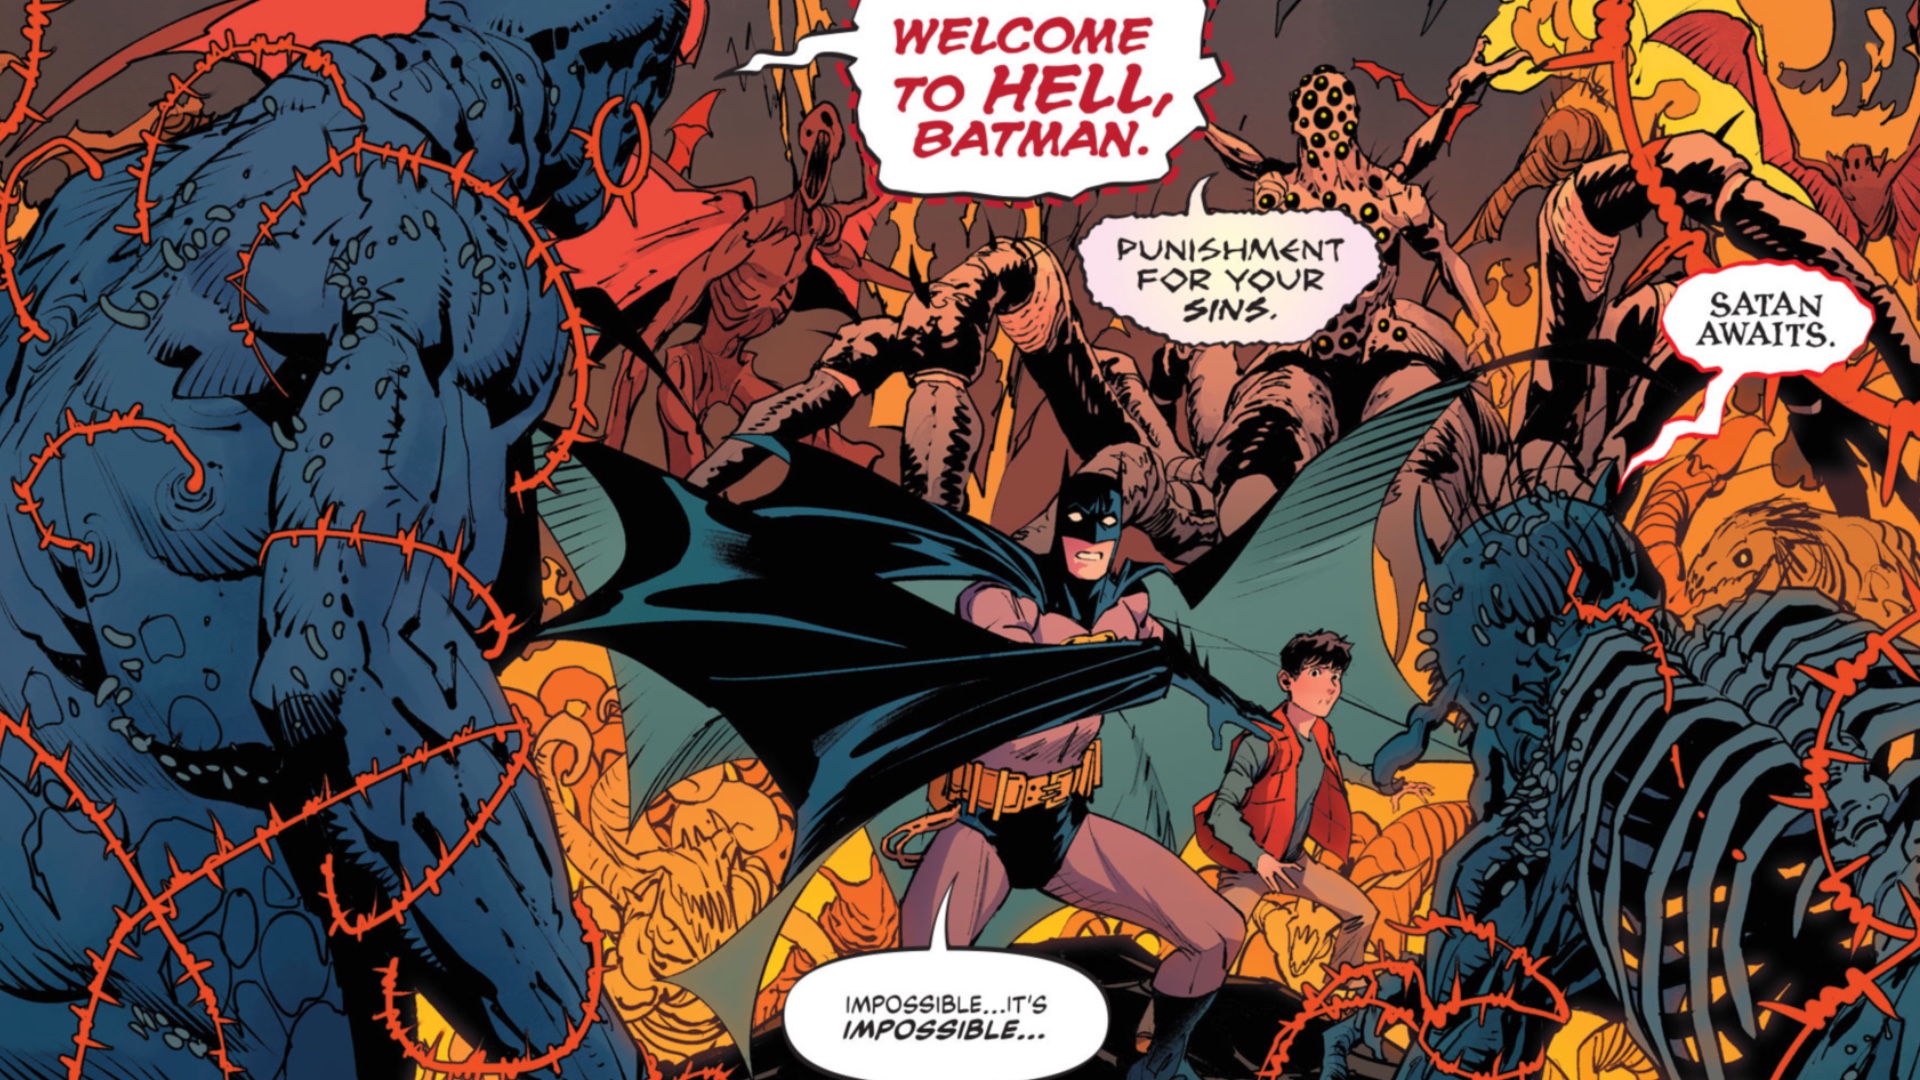 Batman and Superman go to Hell in World's Finest #3 | GamesRadar+